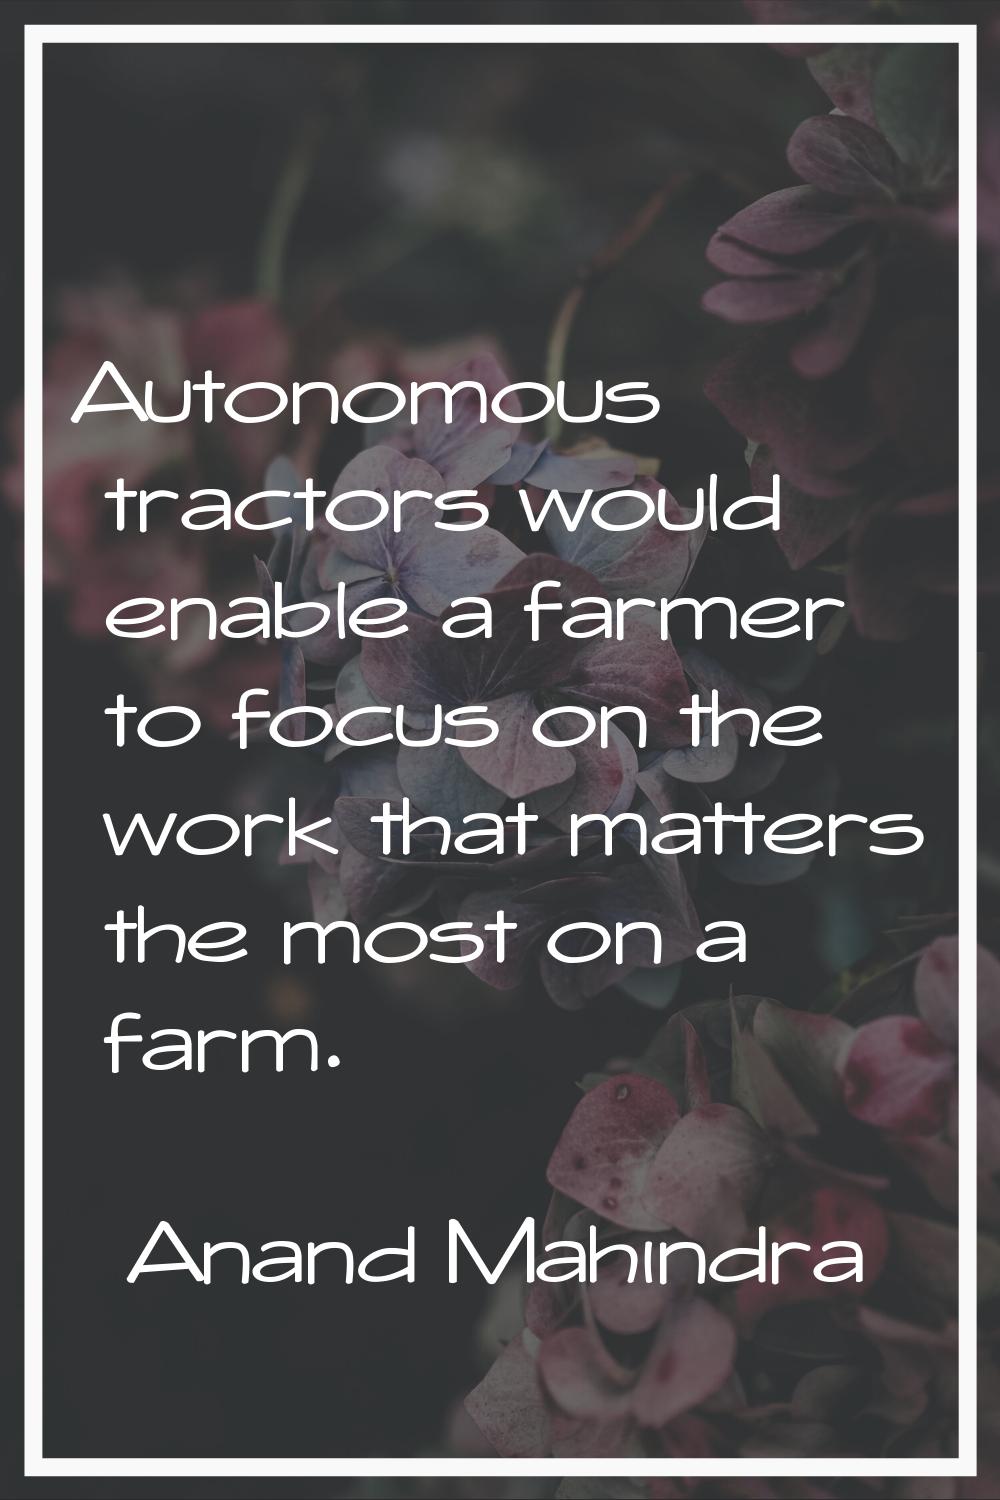 Autonomous tractors would enable a farmer to focus on the work that matters the most on a farm.